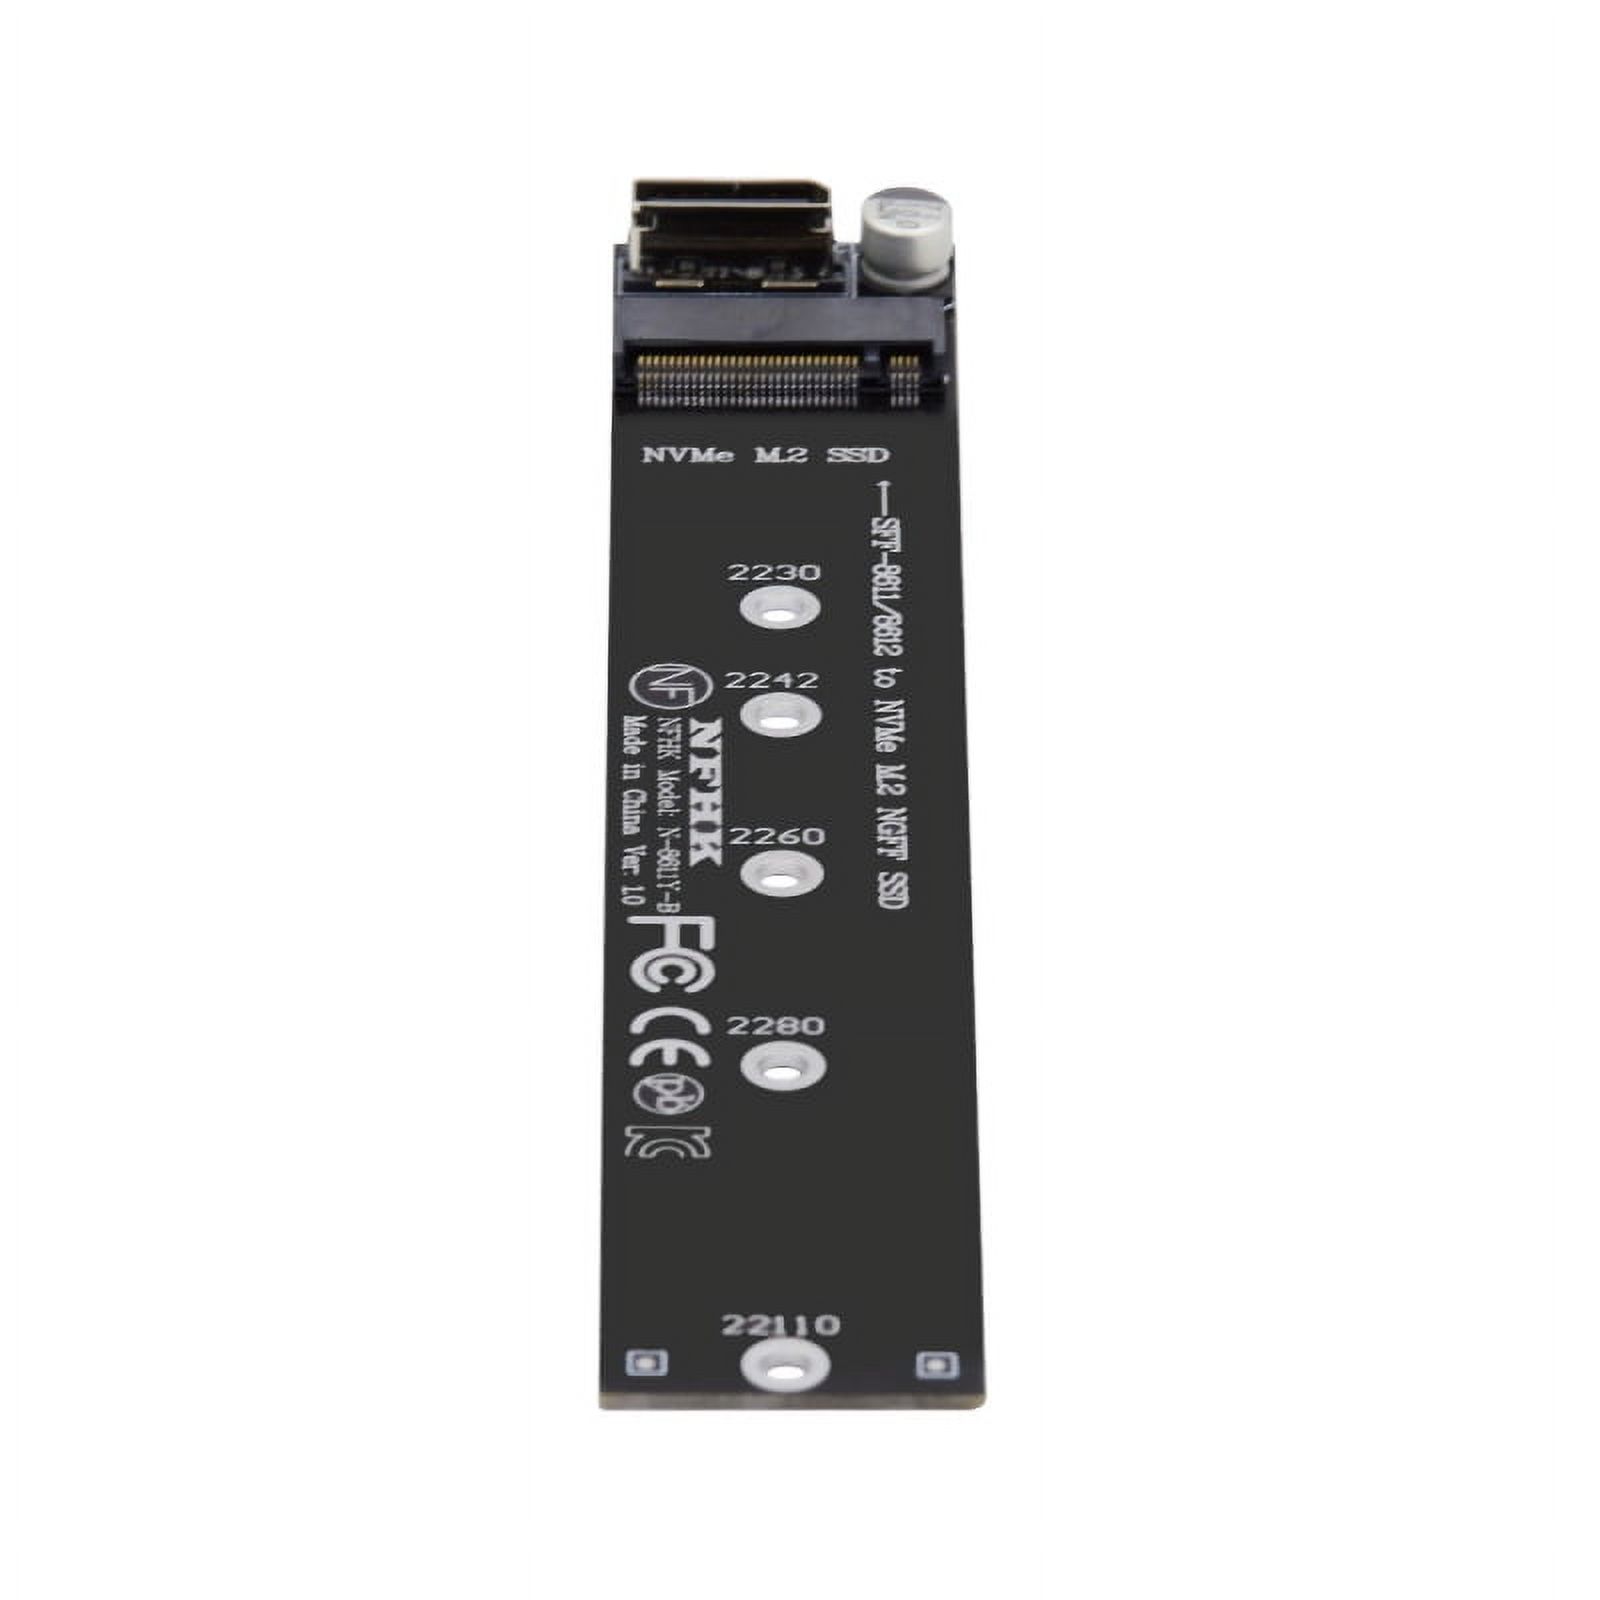 JSER Oculink SFF-8612 SFF-8611 to M.2 Kit NGFF M-Key to NVME PCIe SSD 2280 22110mm Adapter for Mainboard - image 3 of 7